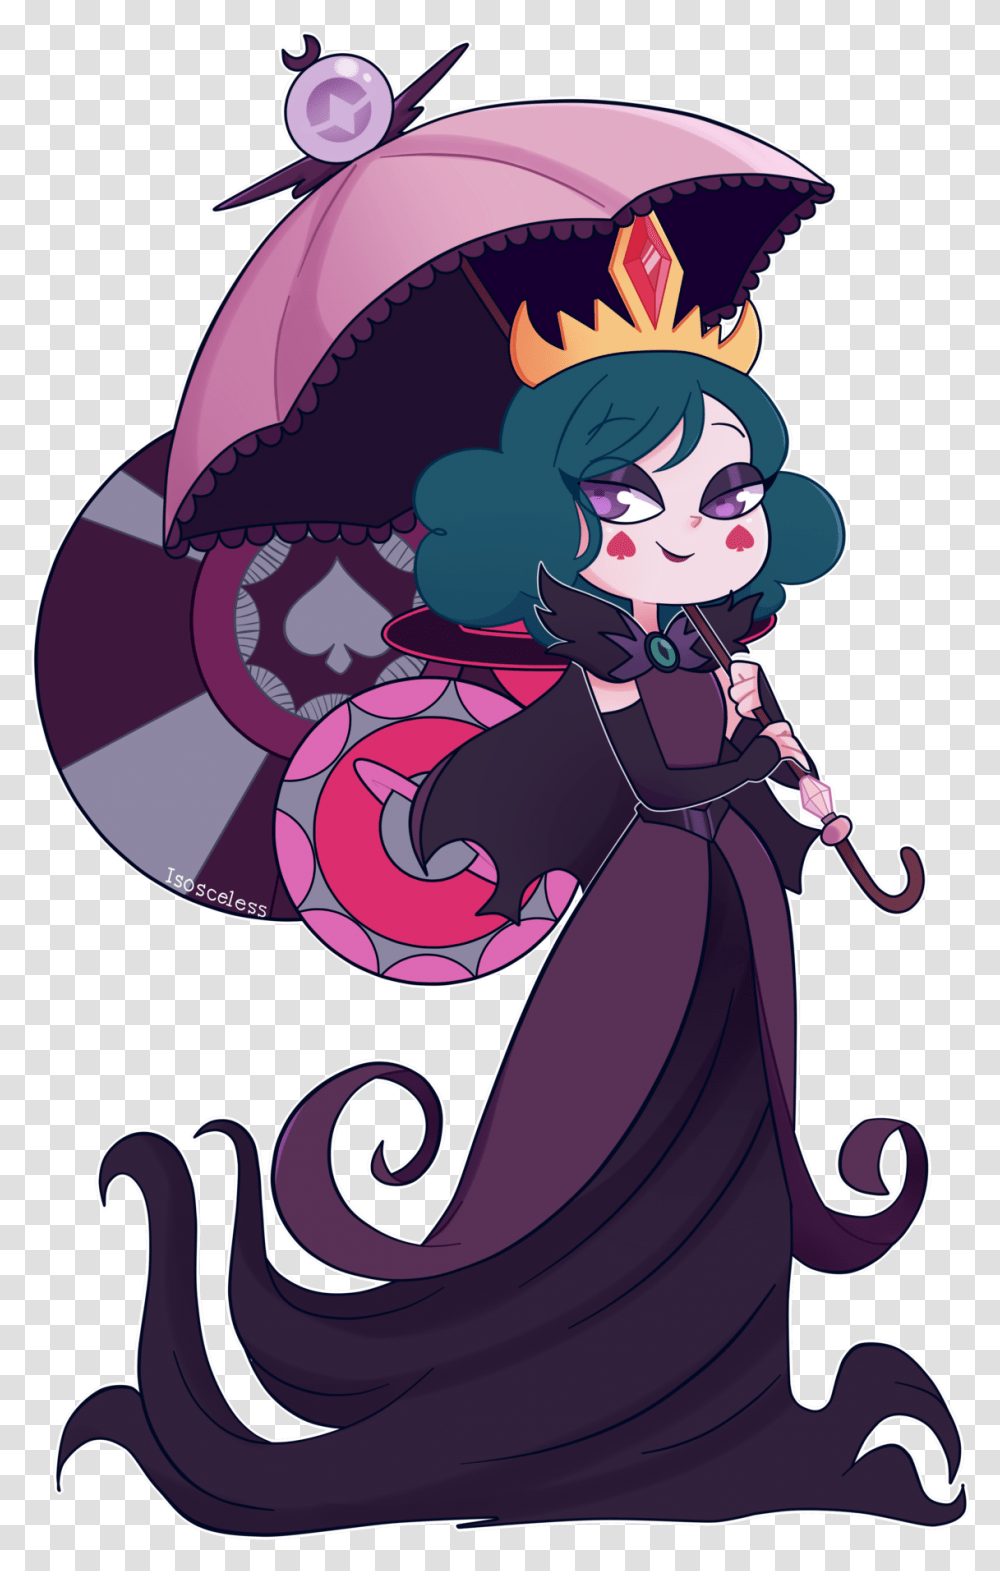 Queens Of Mewni Star Vs The Forces Of Evil Svtfoe Eclipsa Star Vs The Forces Of Evil Eclipsa, Helmet Transparent Png